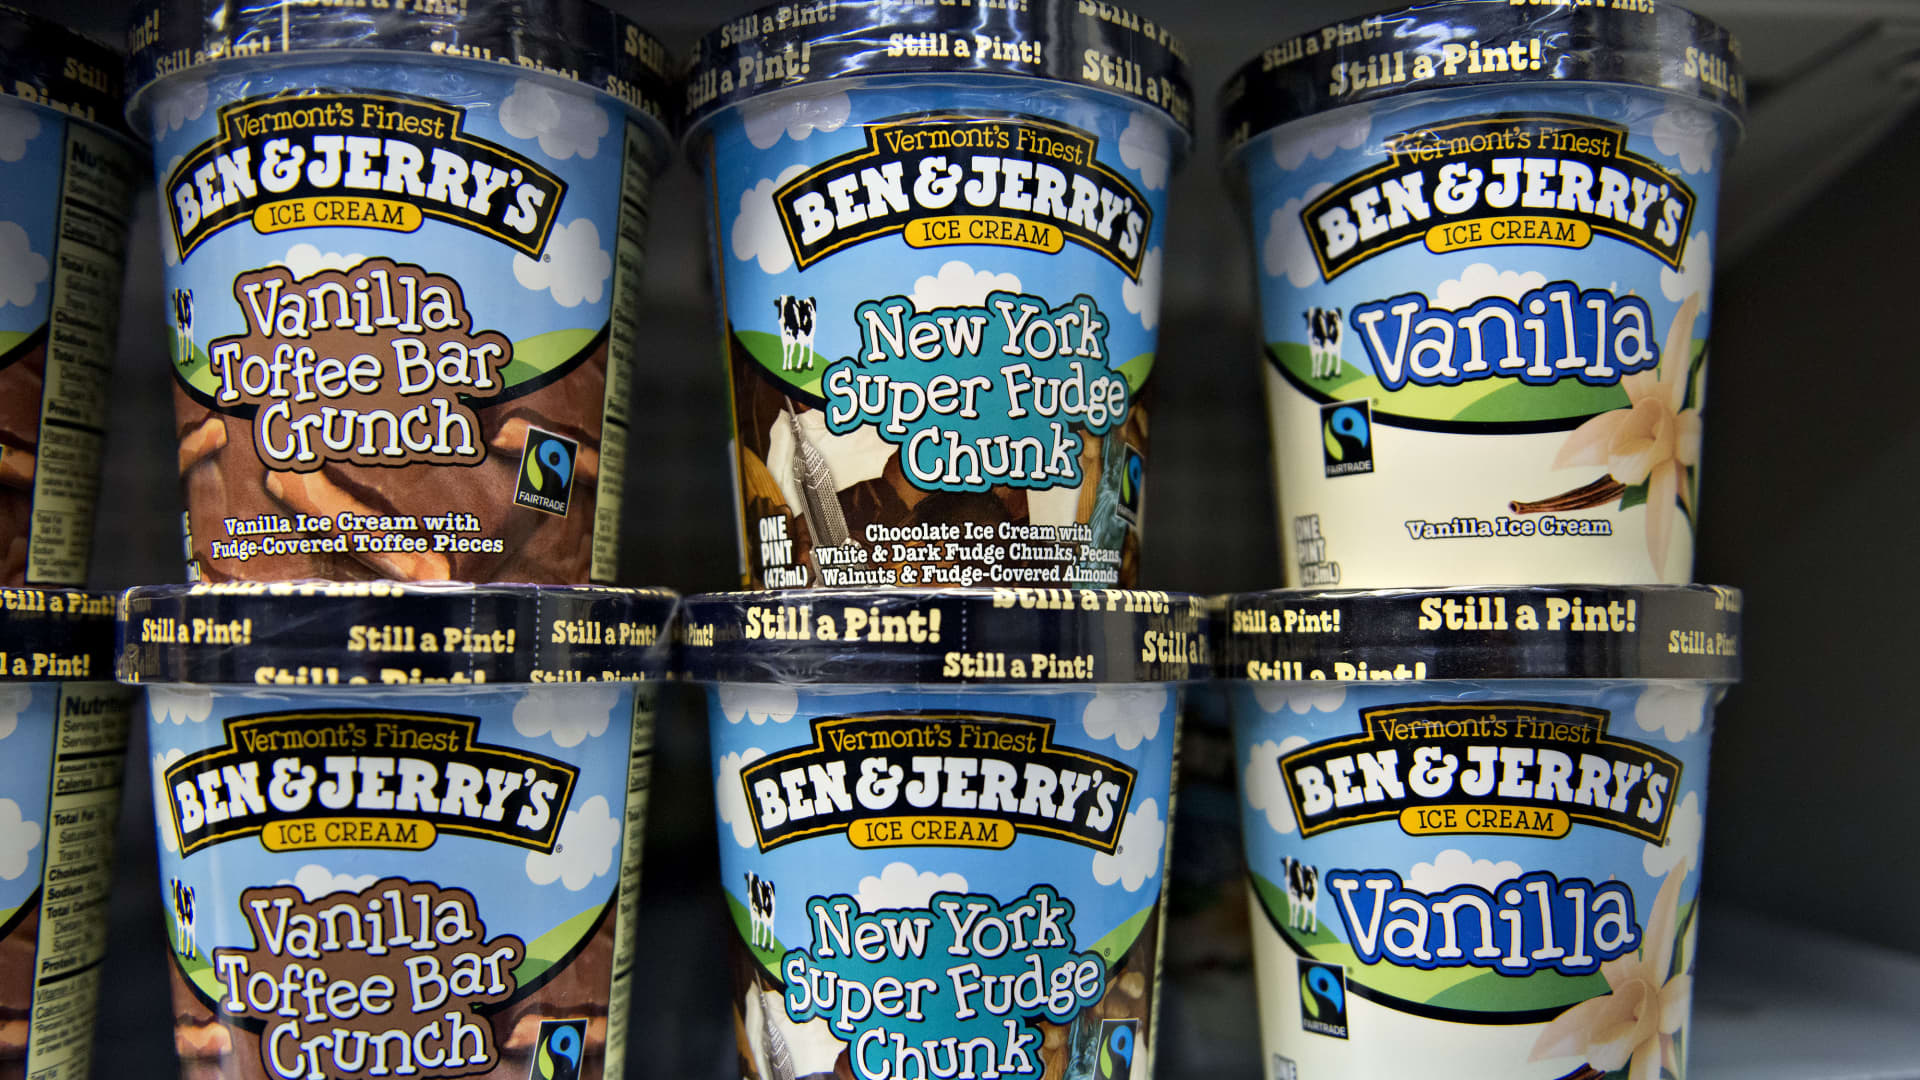 Ben & Jerry’s galvanizes customers to lobby for tighter gun laws after Texas, New York mass shootings